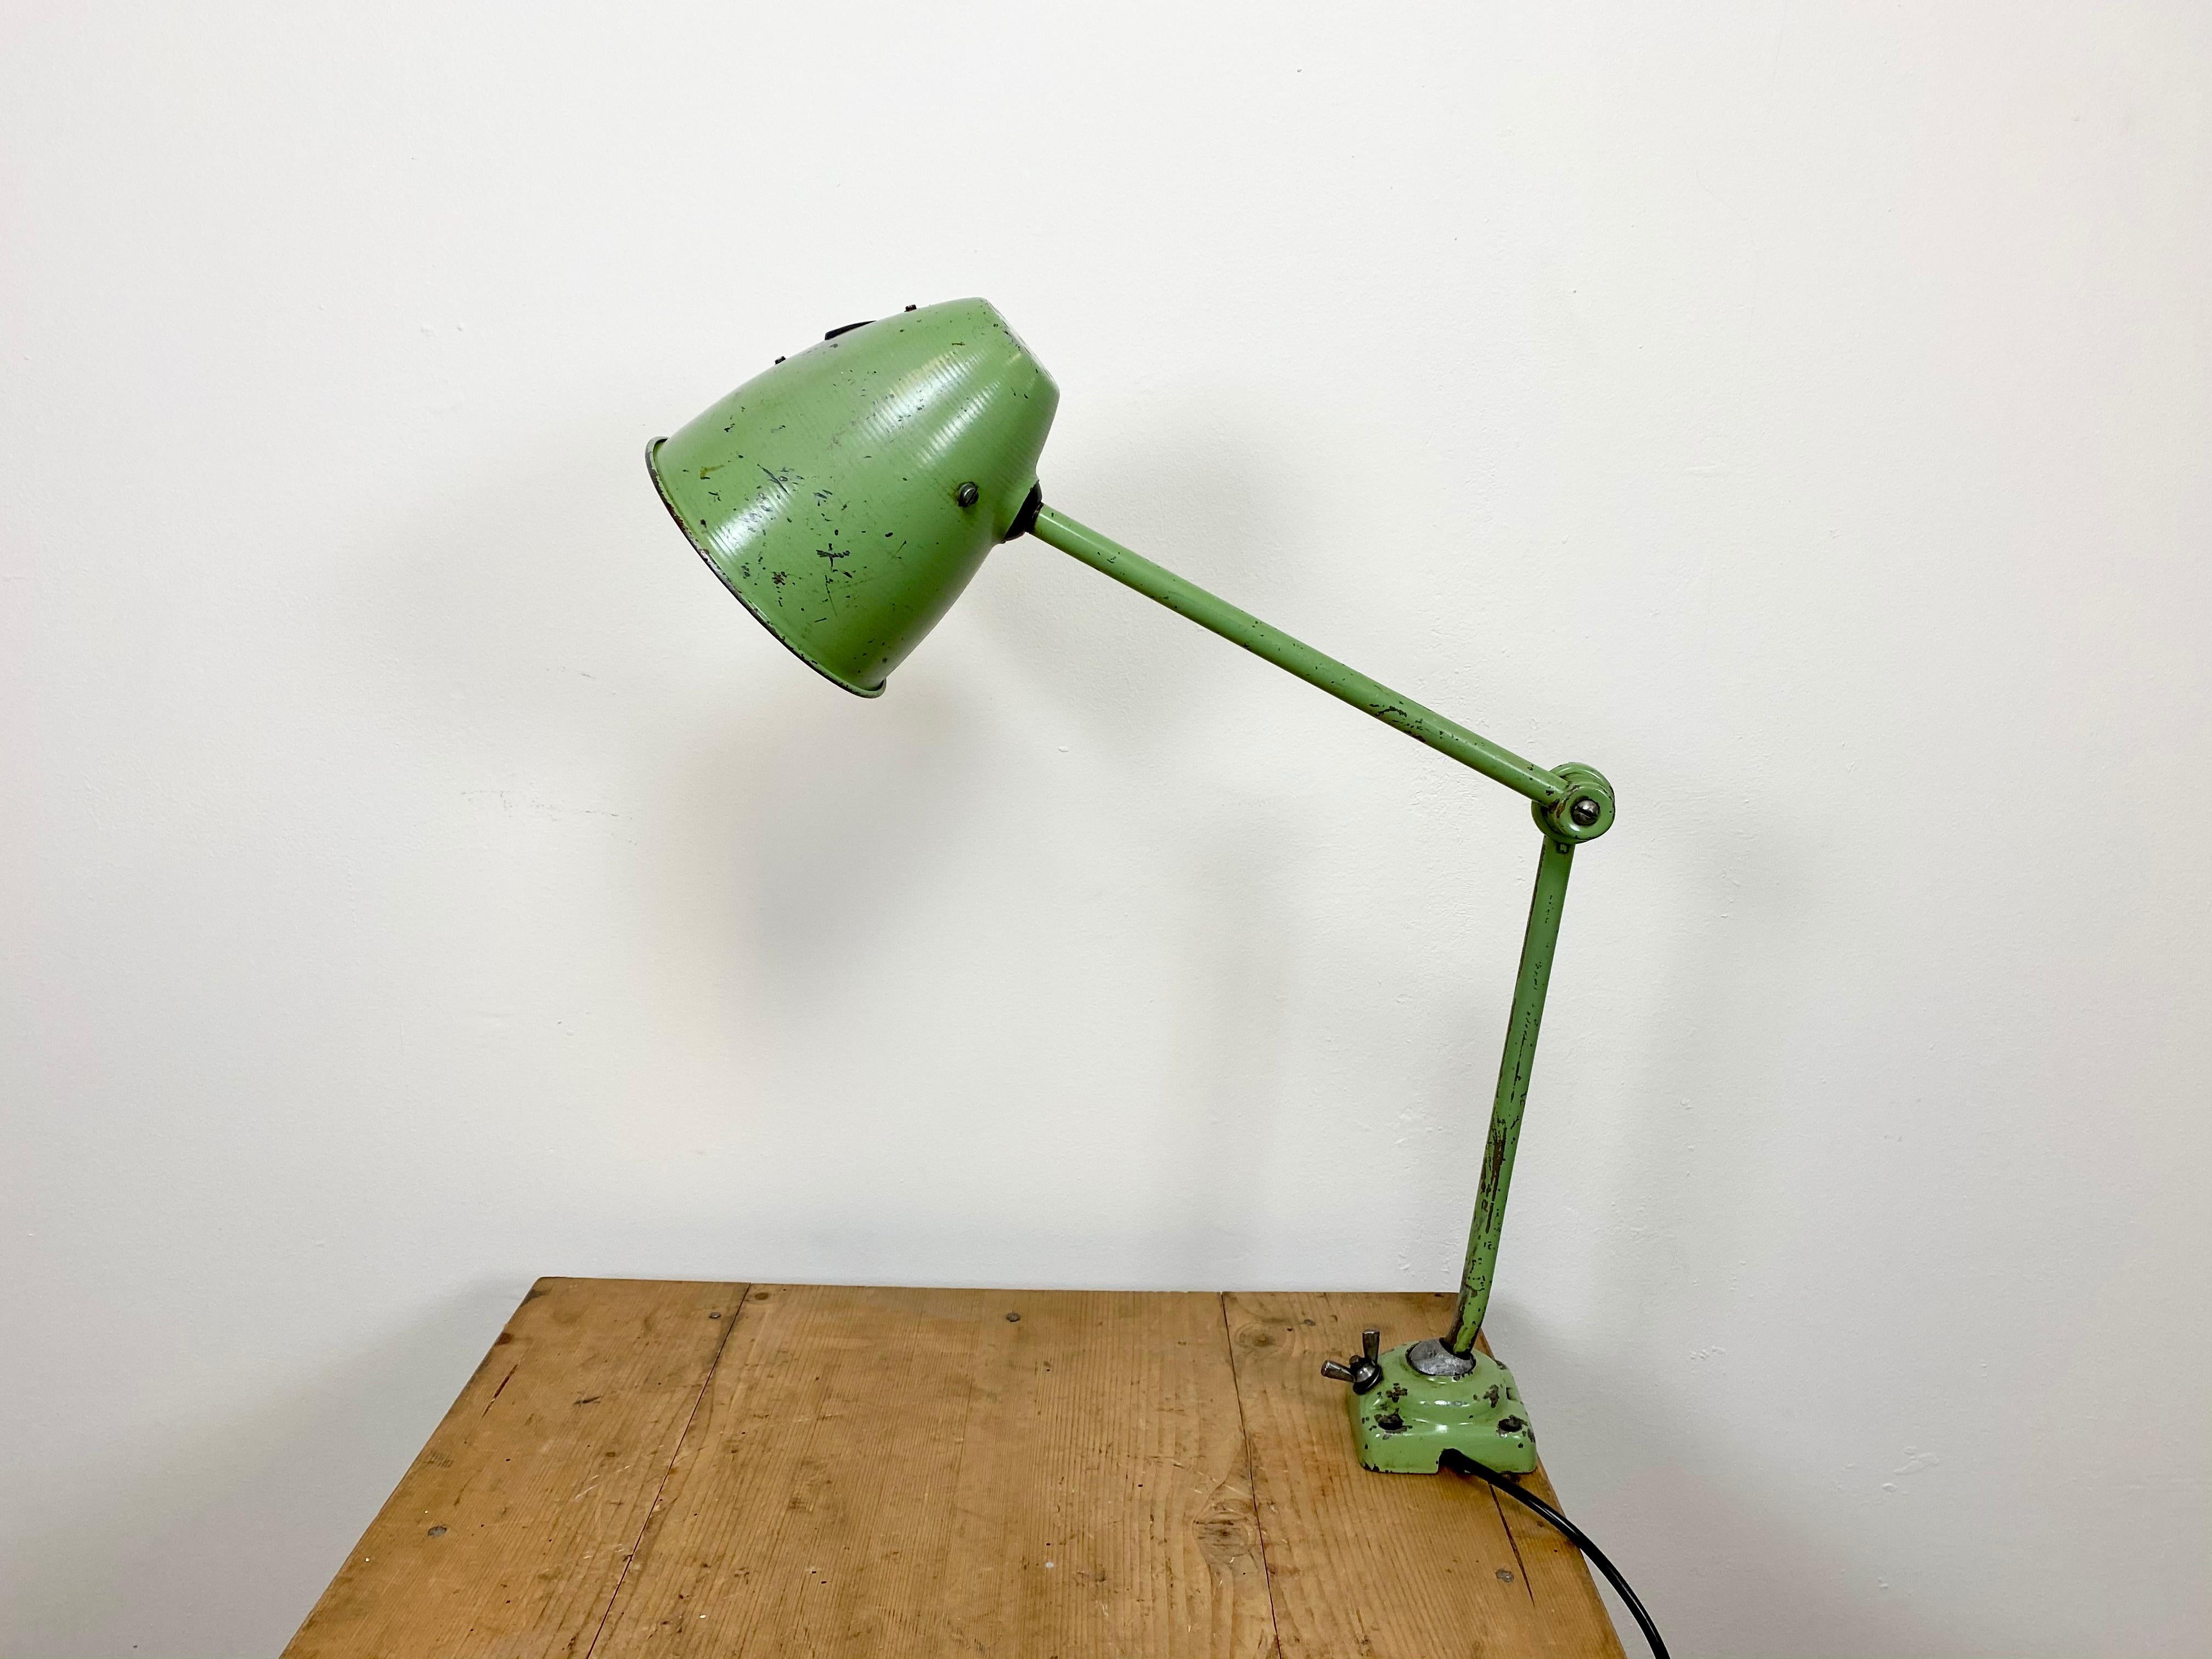 This green industrial style iron table lamp was made in former Czechoslovakia. It has an adjustable shade, three adjustable joints, a porcelain socket for E 27 light bulbs and new wire. The switch is situated directly on the shade. Fully functional.